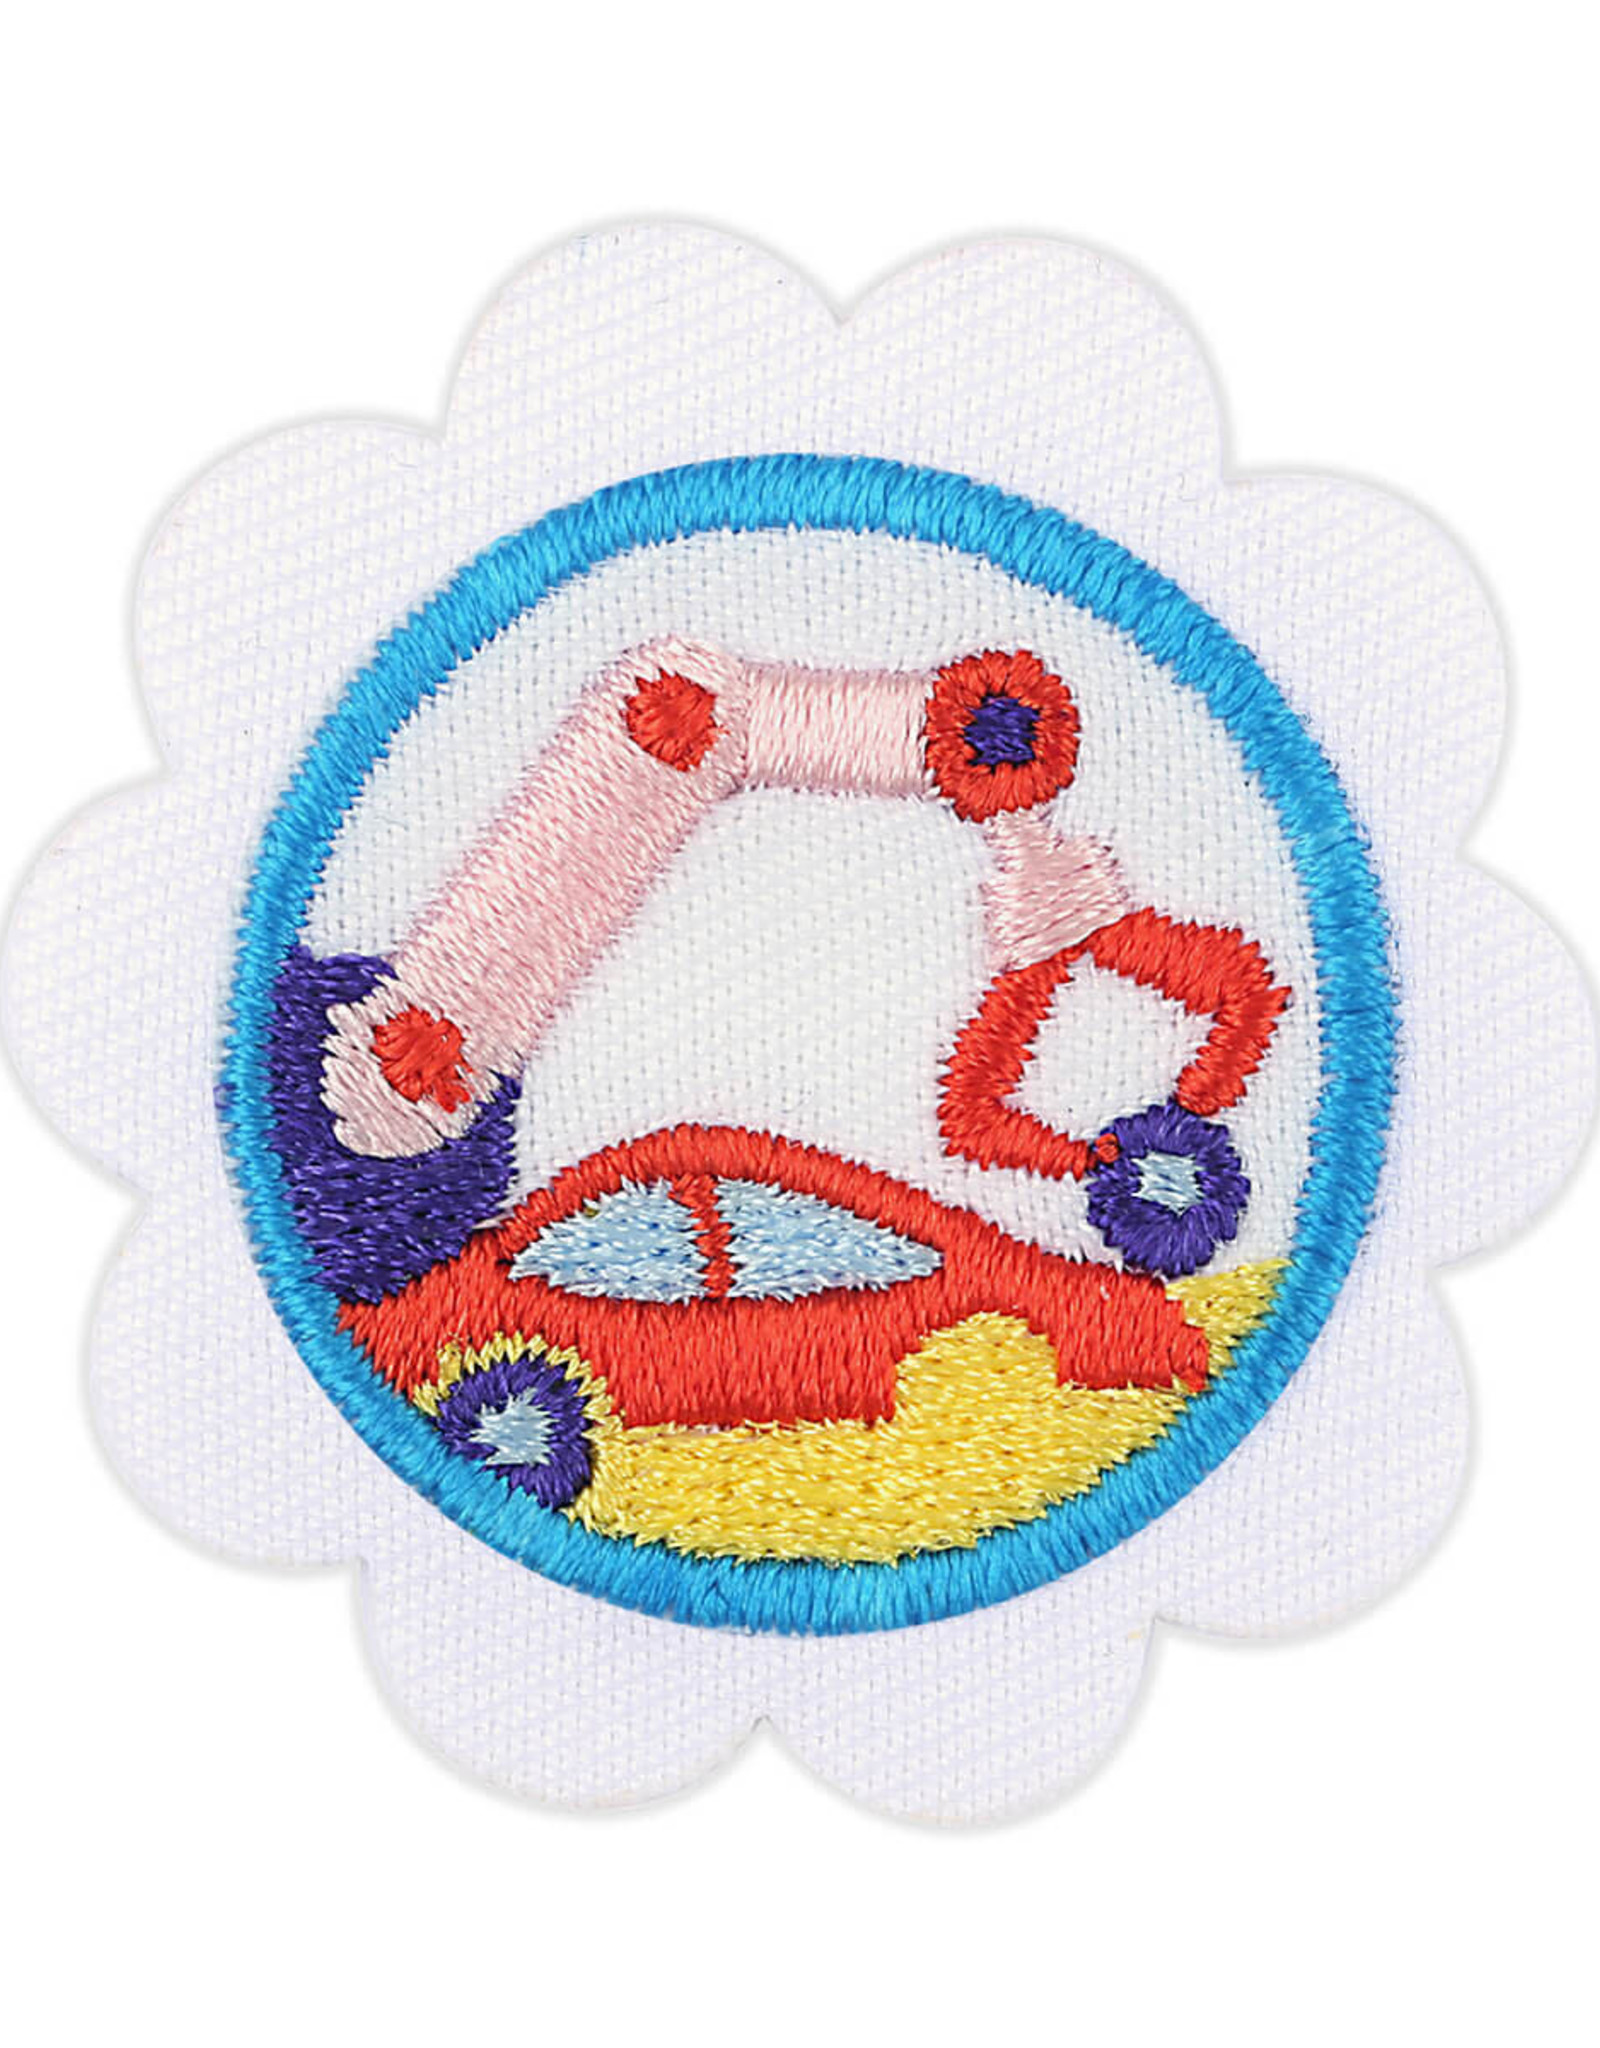 GIRL SCOUTS OF THE USA Daisy Automotive Manufacturing 3 Badge